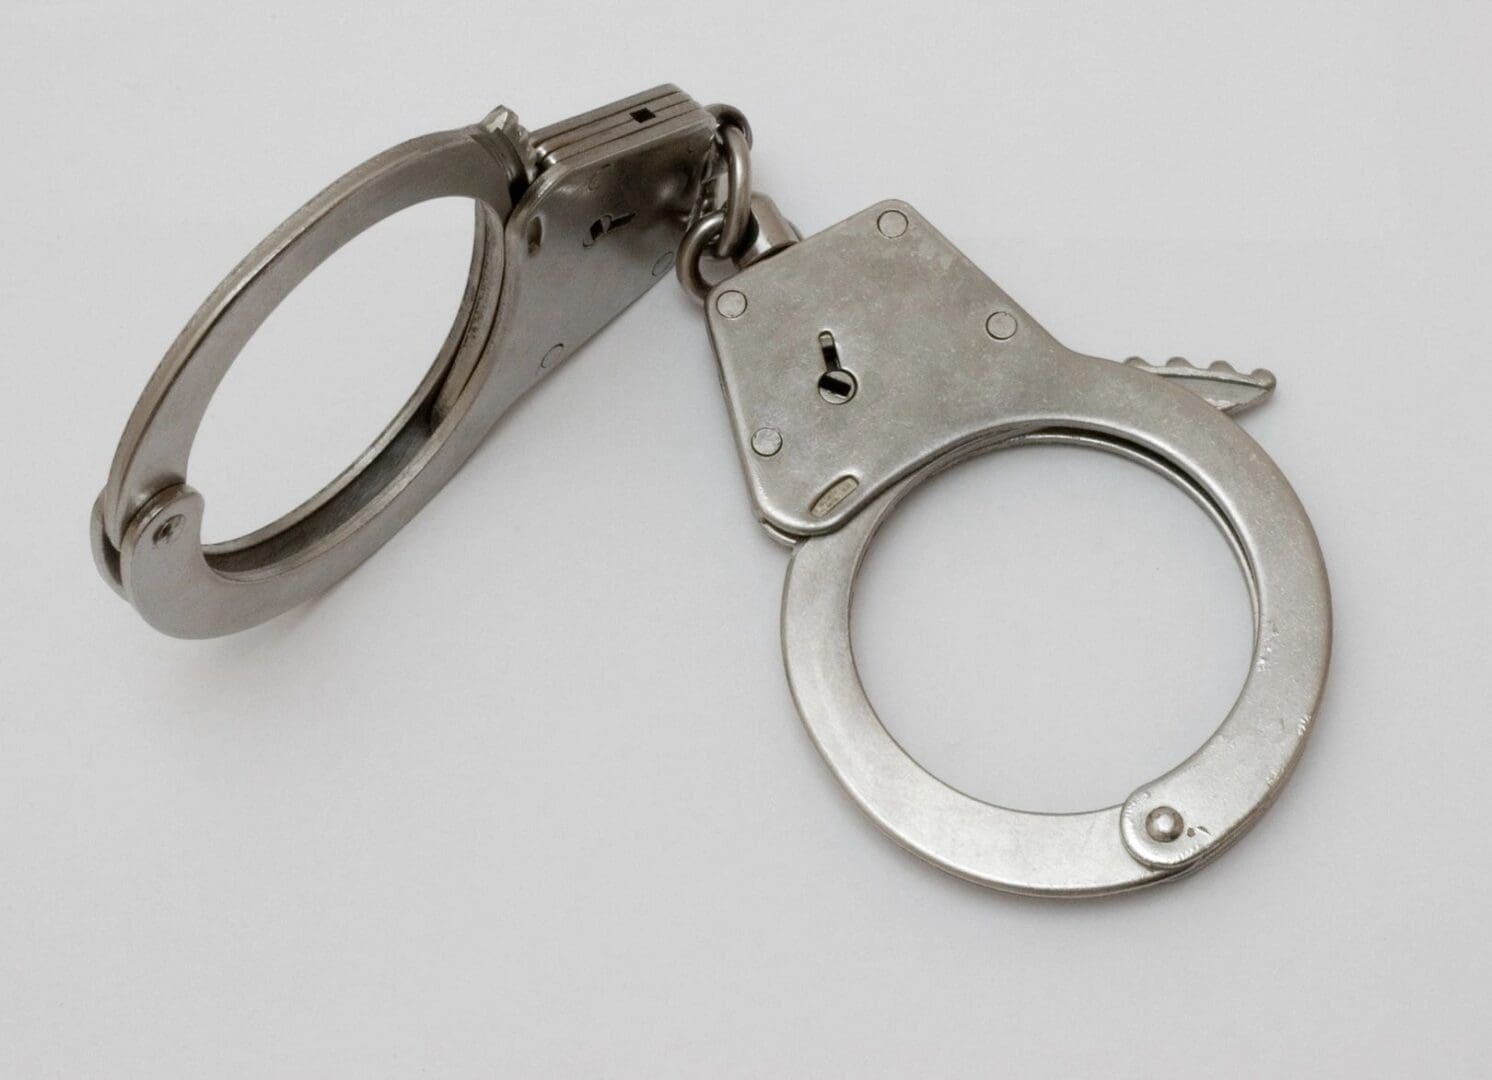 A pair of handcuffs on top of a white table.